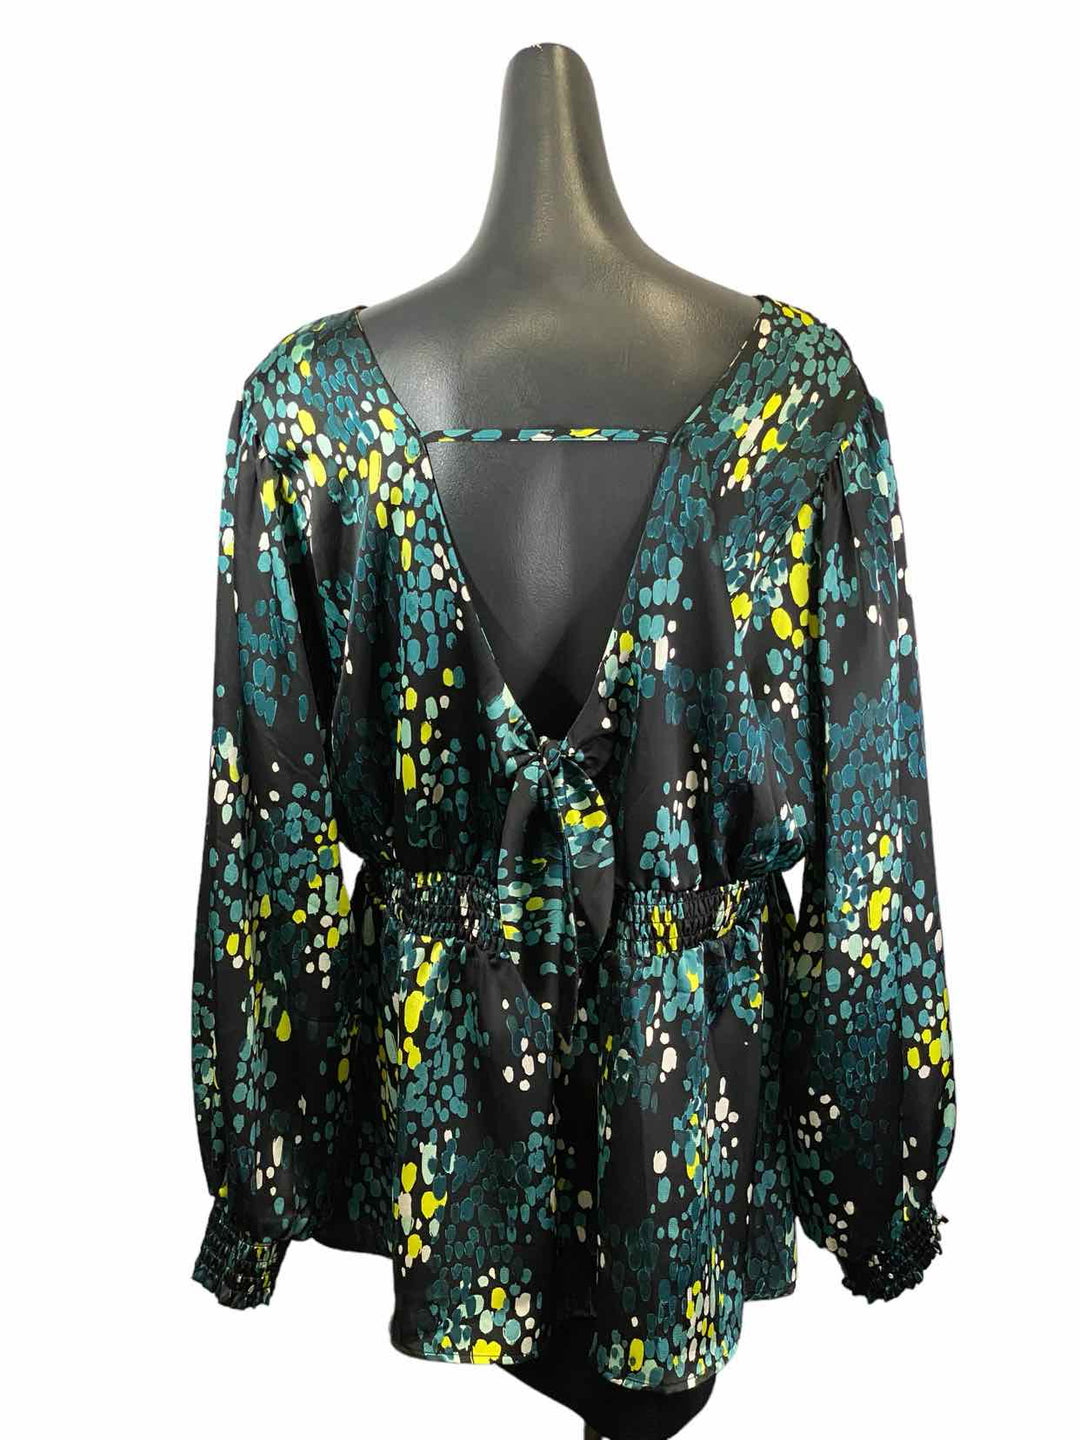 Torrid Size 1(1X) Black Green spotted Long Sleeve Shirts